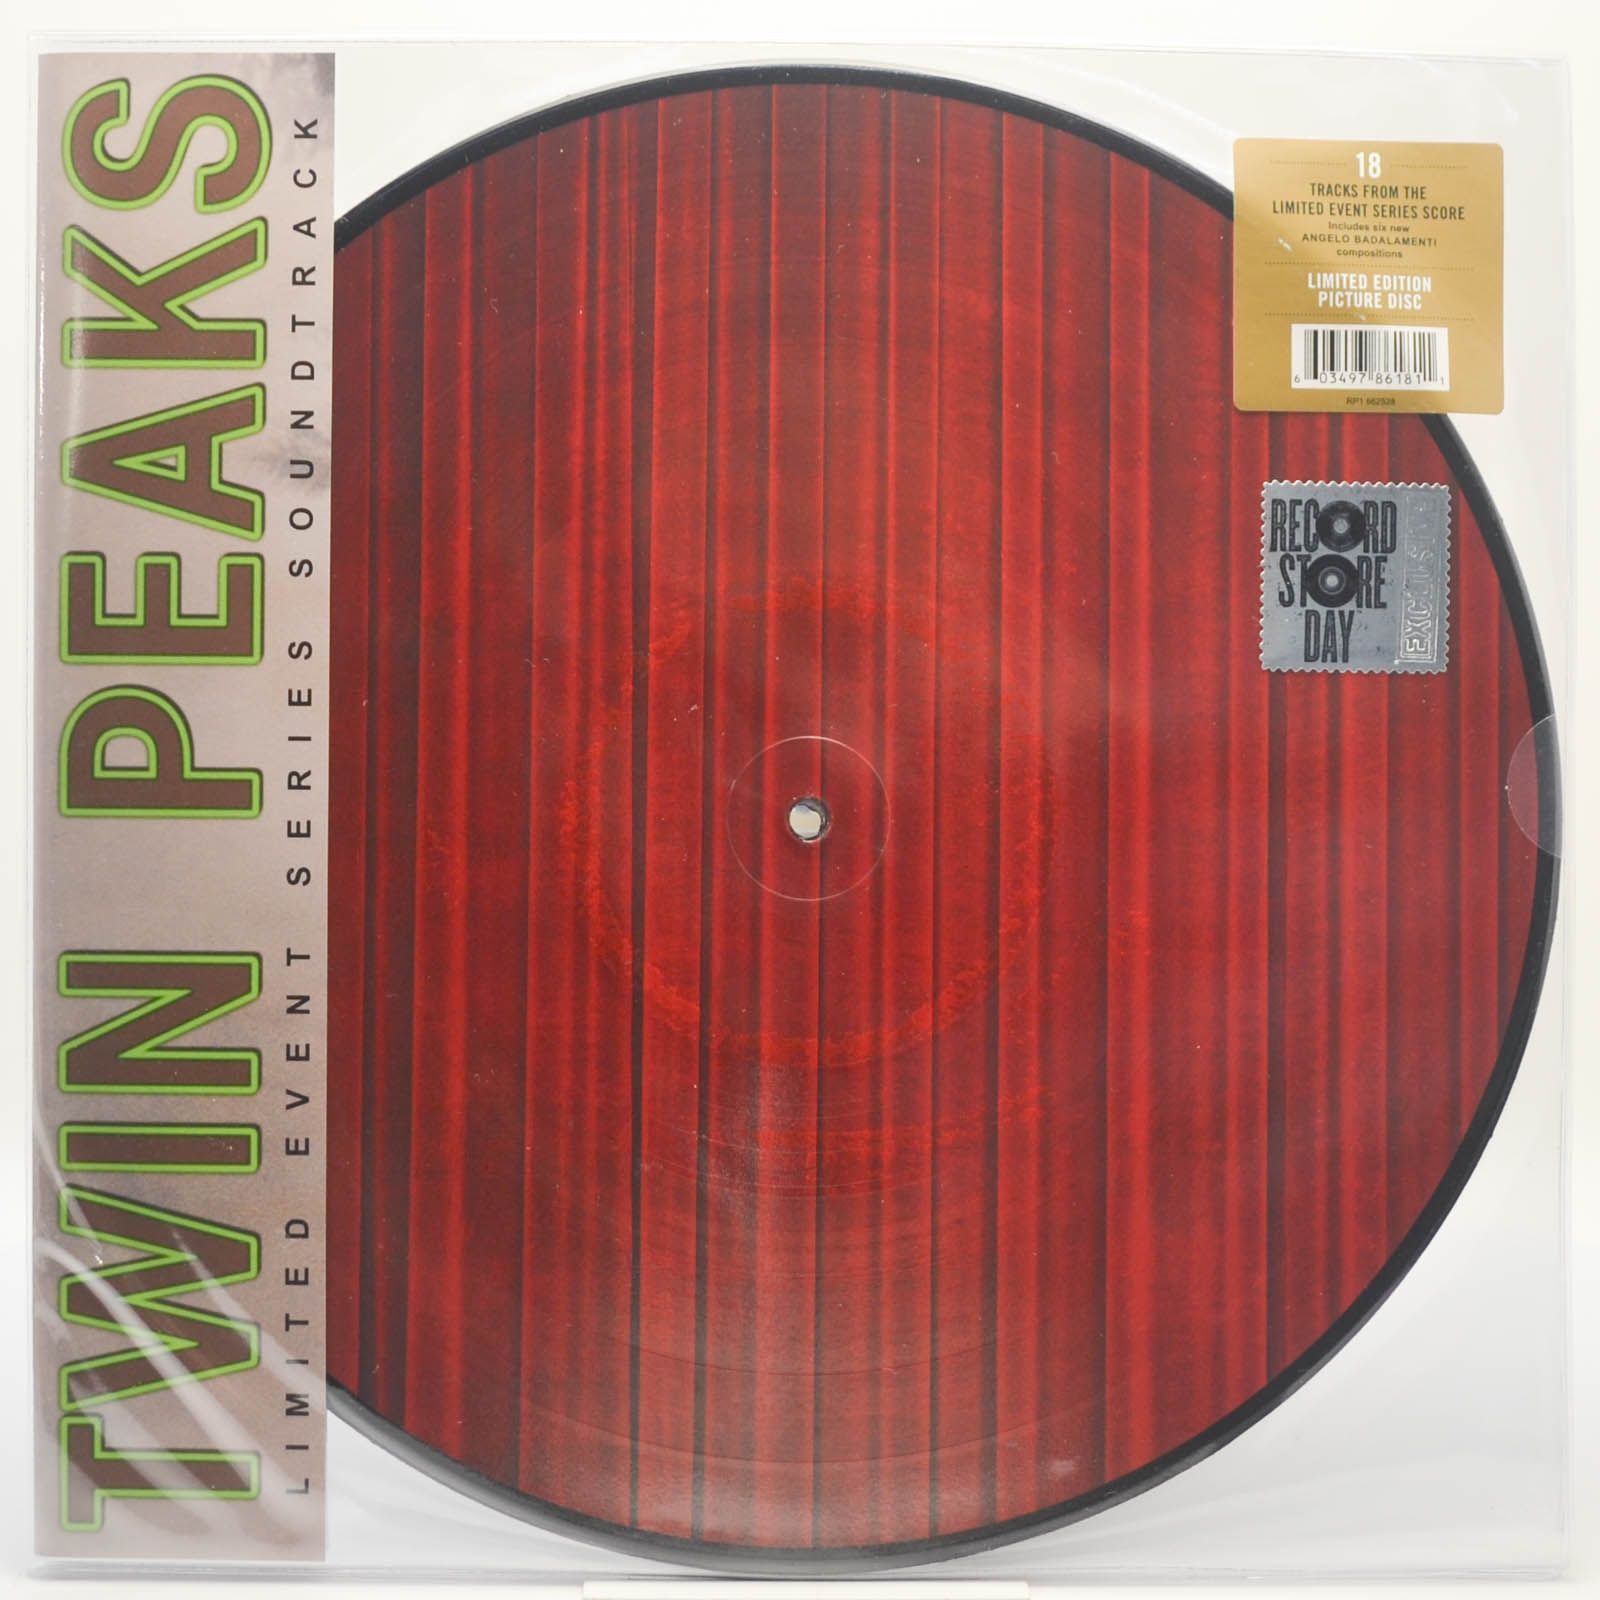 Various — Twin Peaks (Limited Event Series Soundtrack) (2LP), 2017